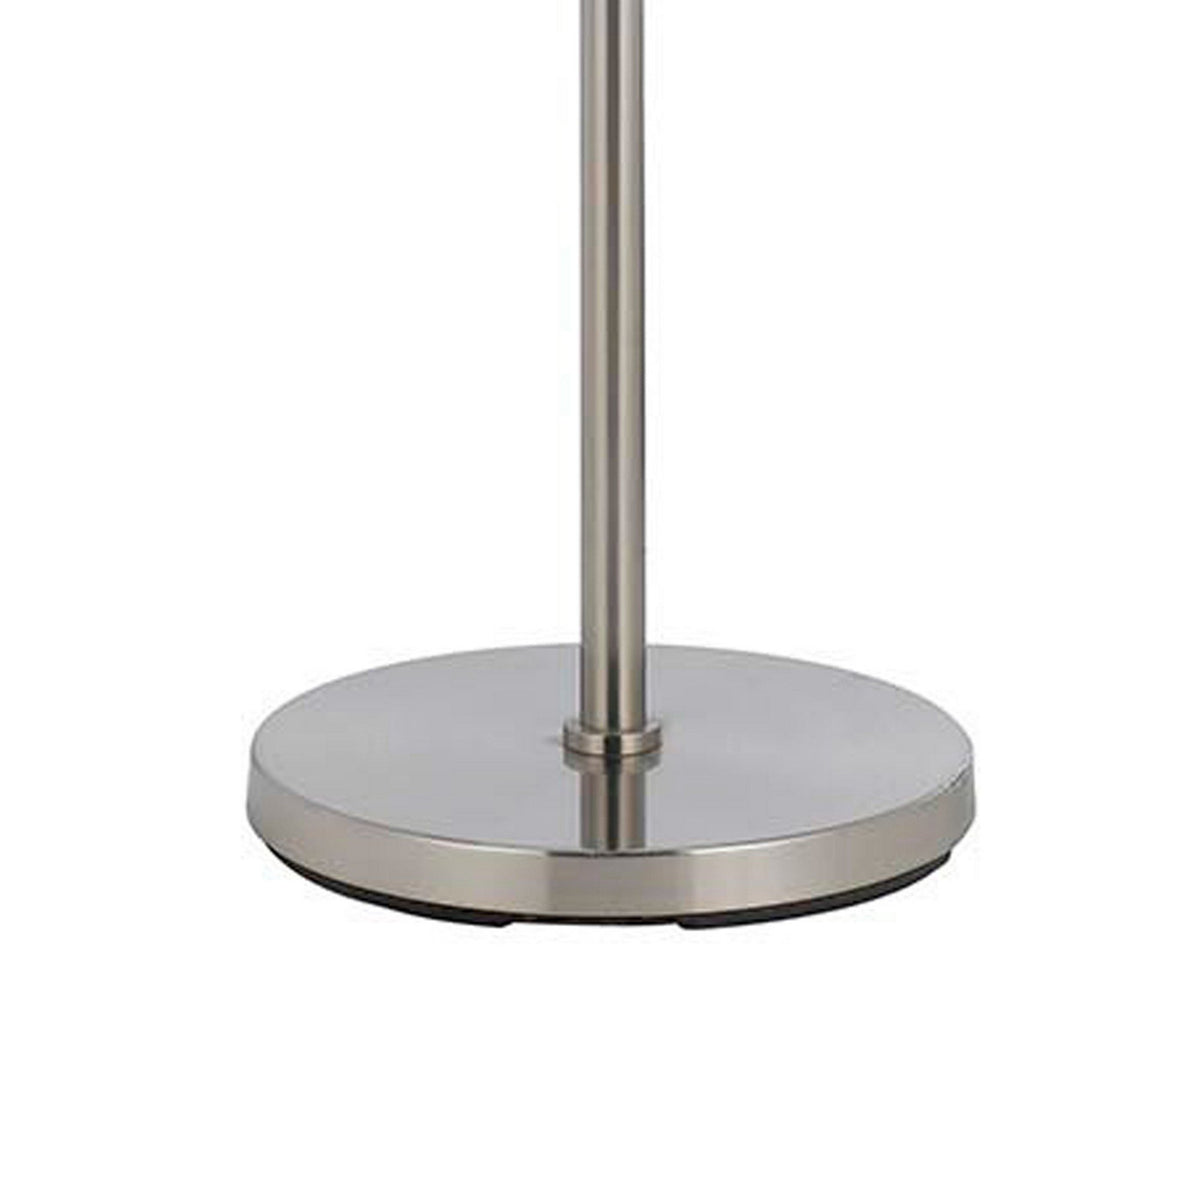 Metal Body Floor Lamp with Fabric Drum Shade and Pull Chain Switch, Silver - BM220845